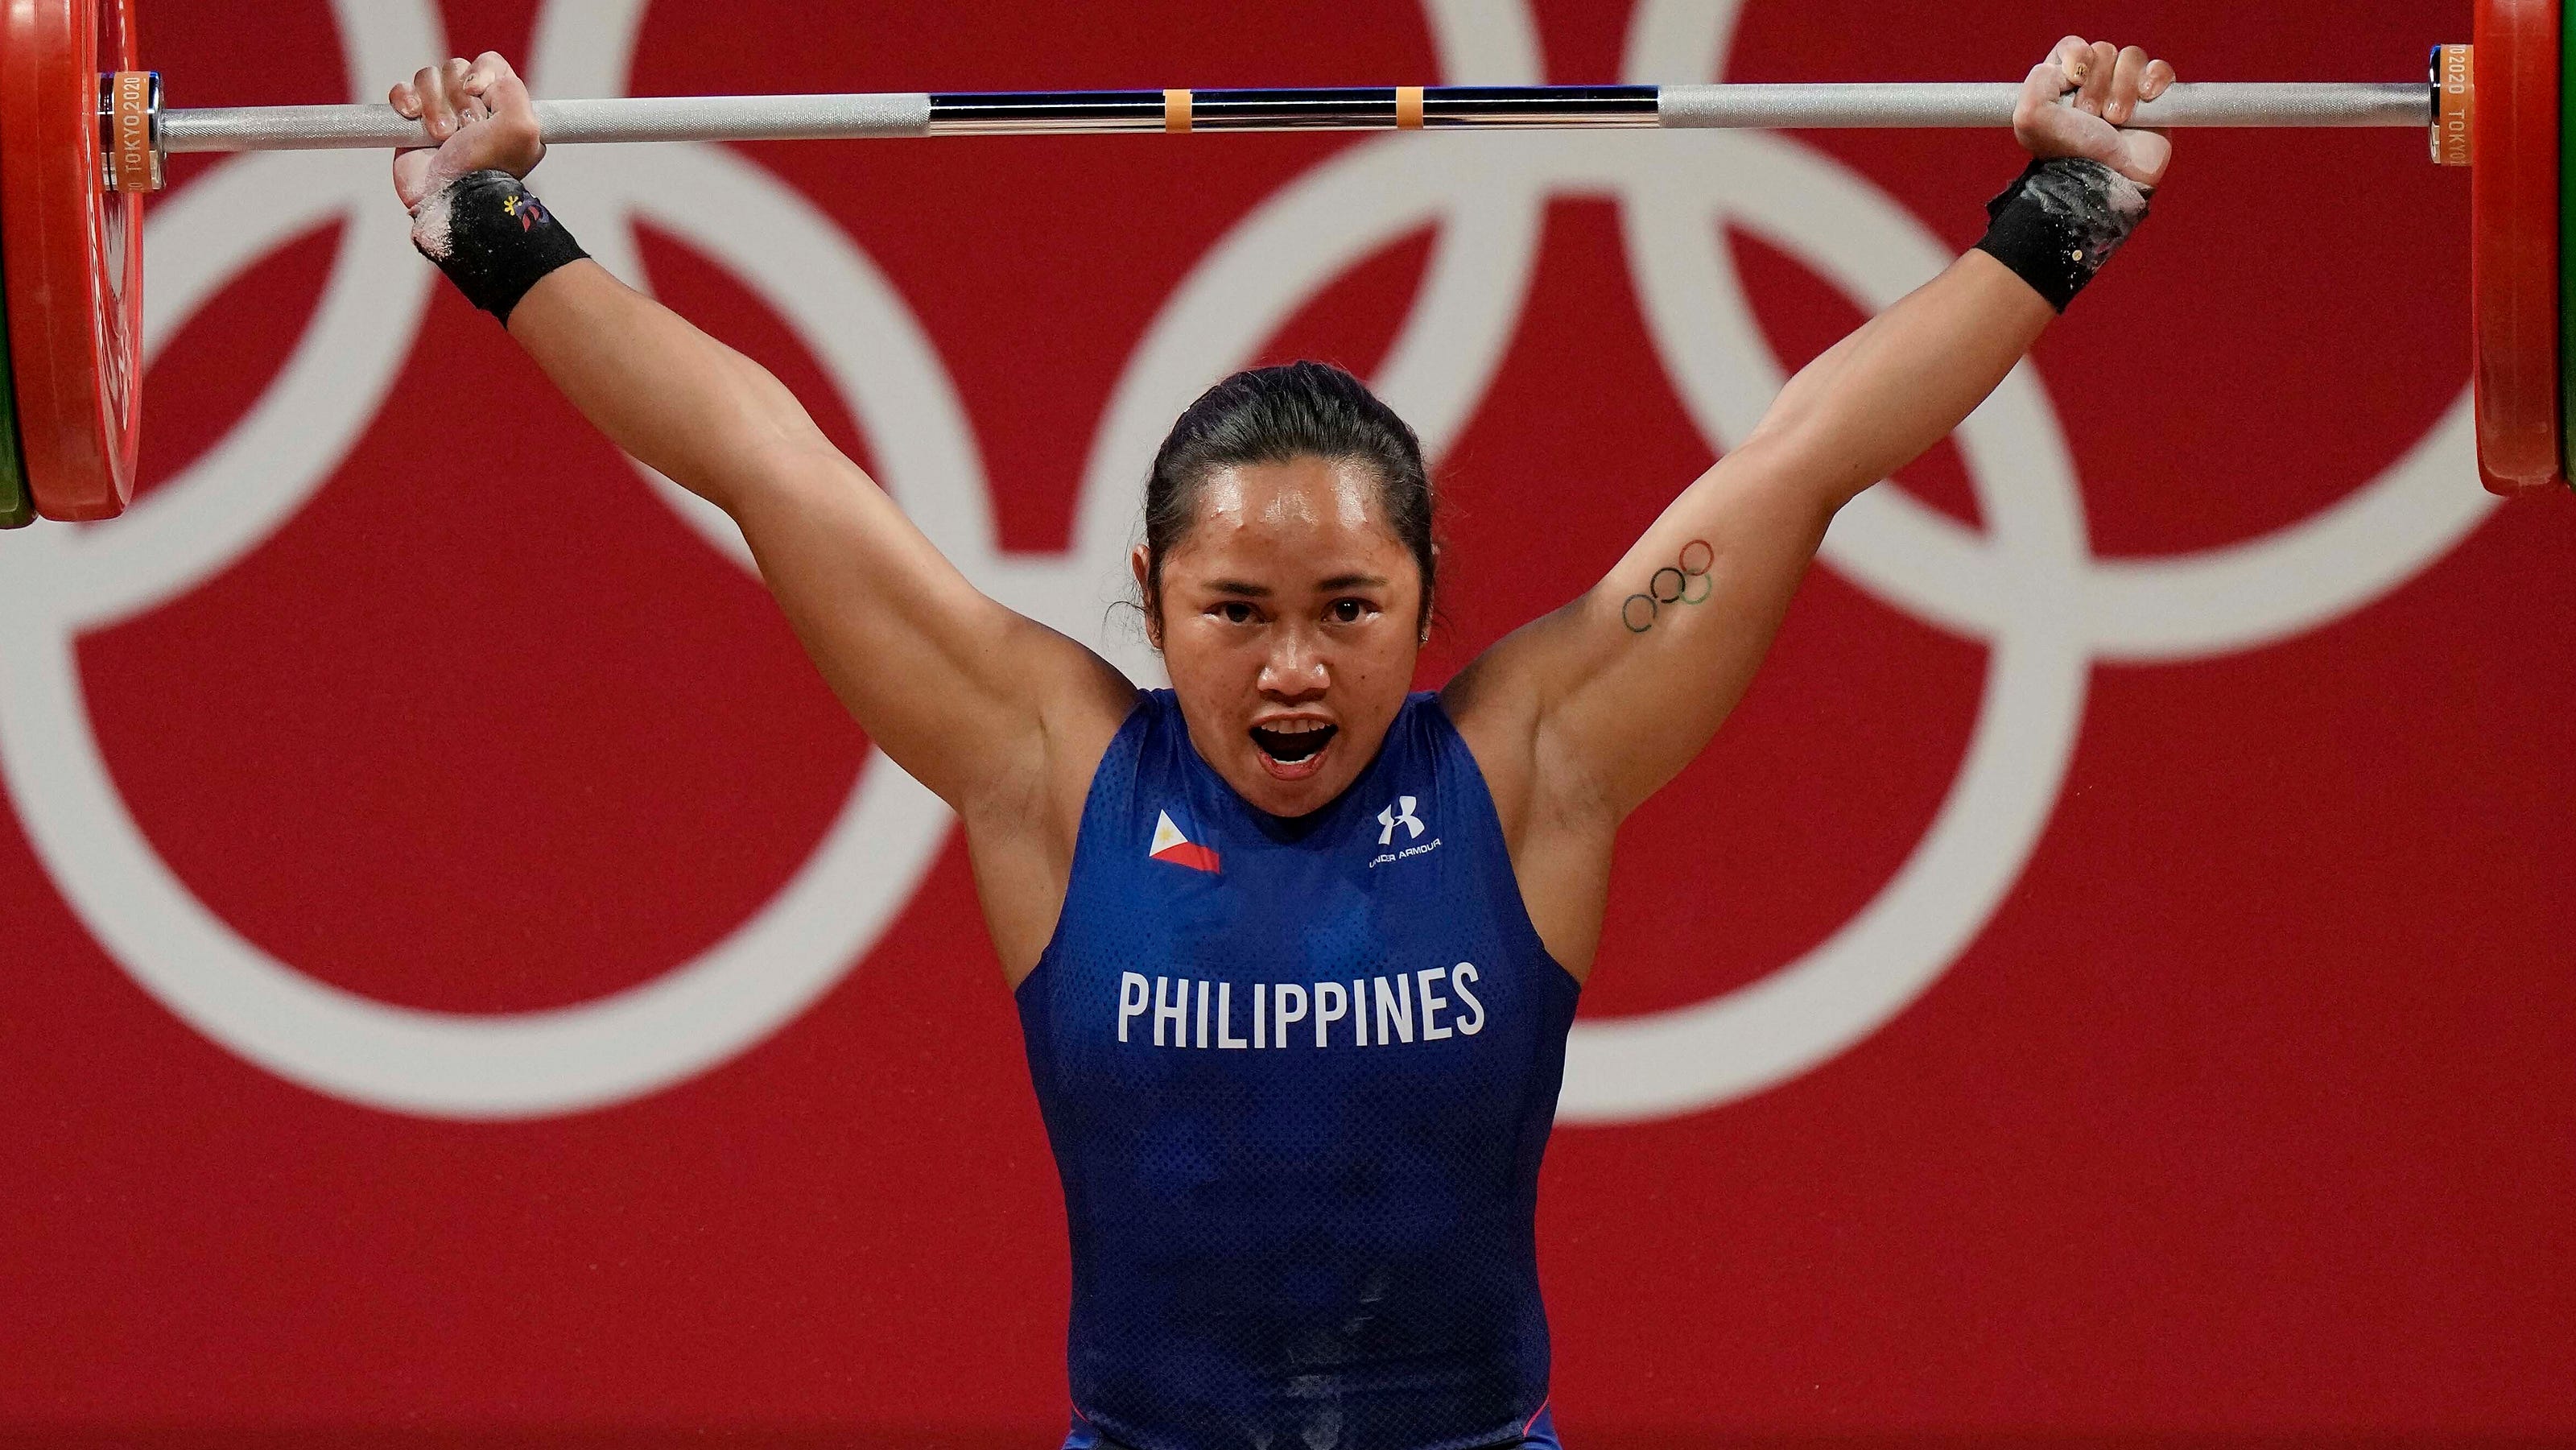 Philippines weightlifter Diaz wins Tokyo Olympic gold medal, 2 houses